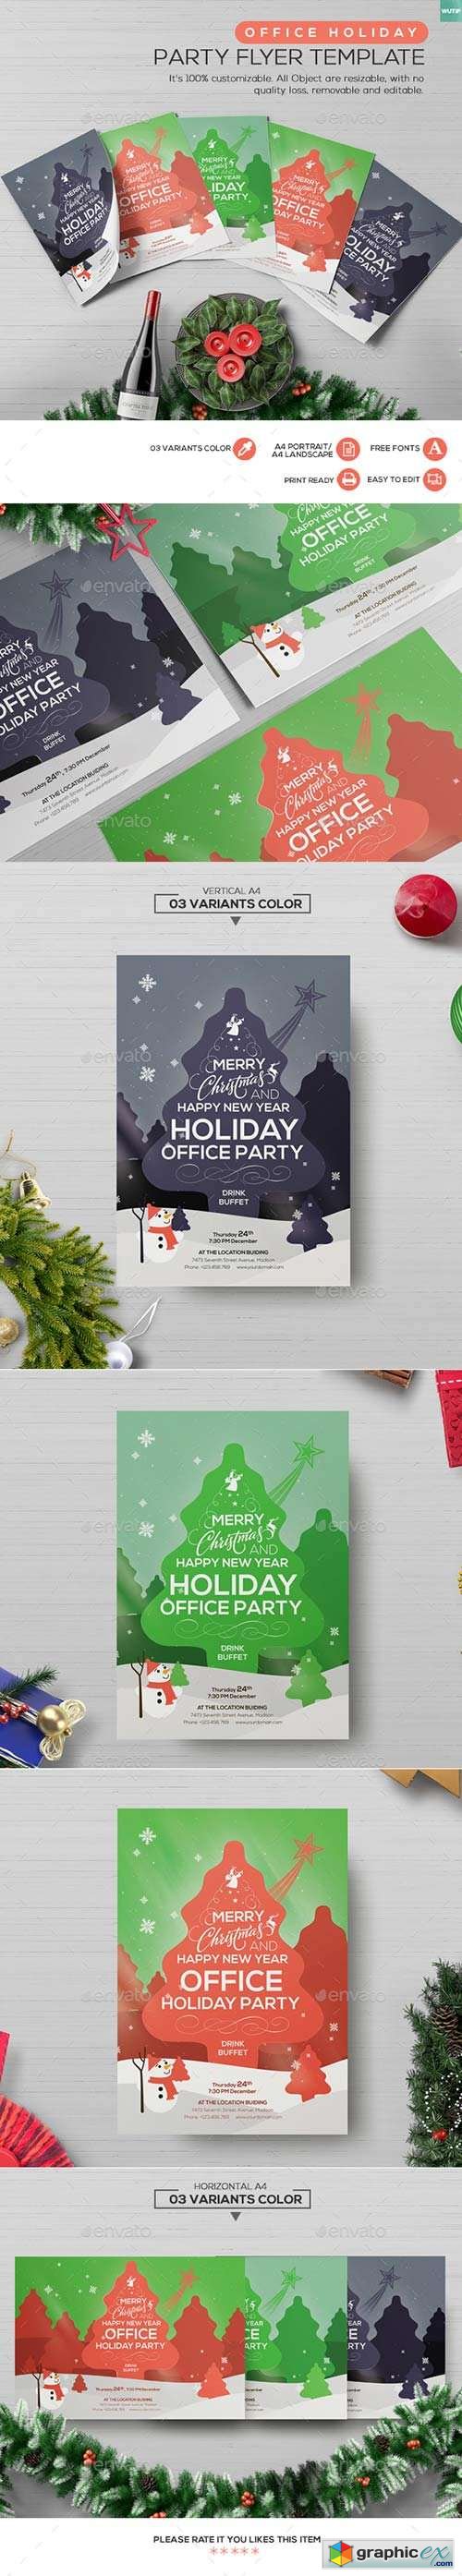 Office Holiday Party - Flyer Template